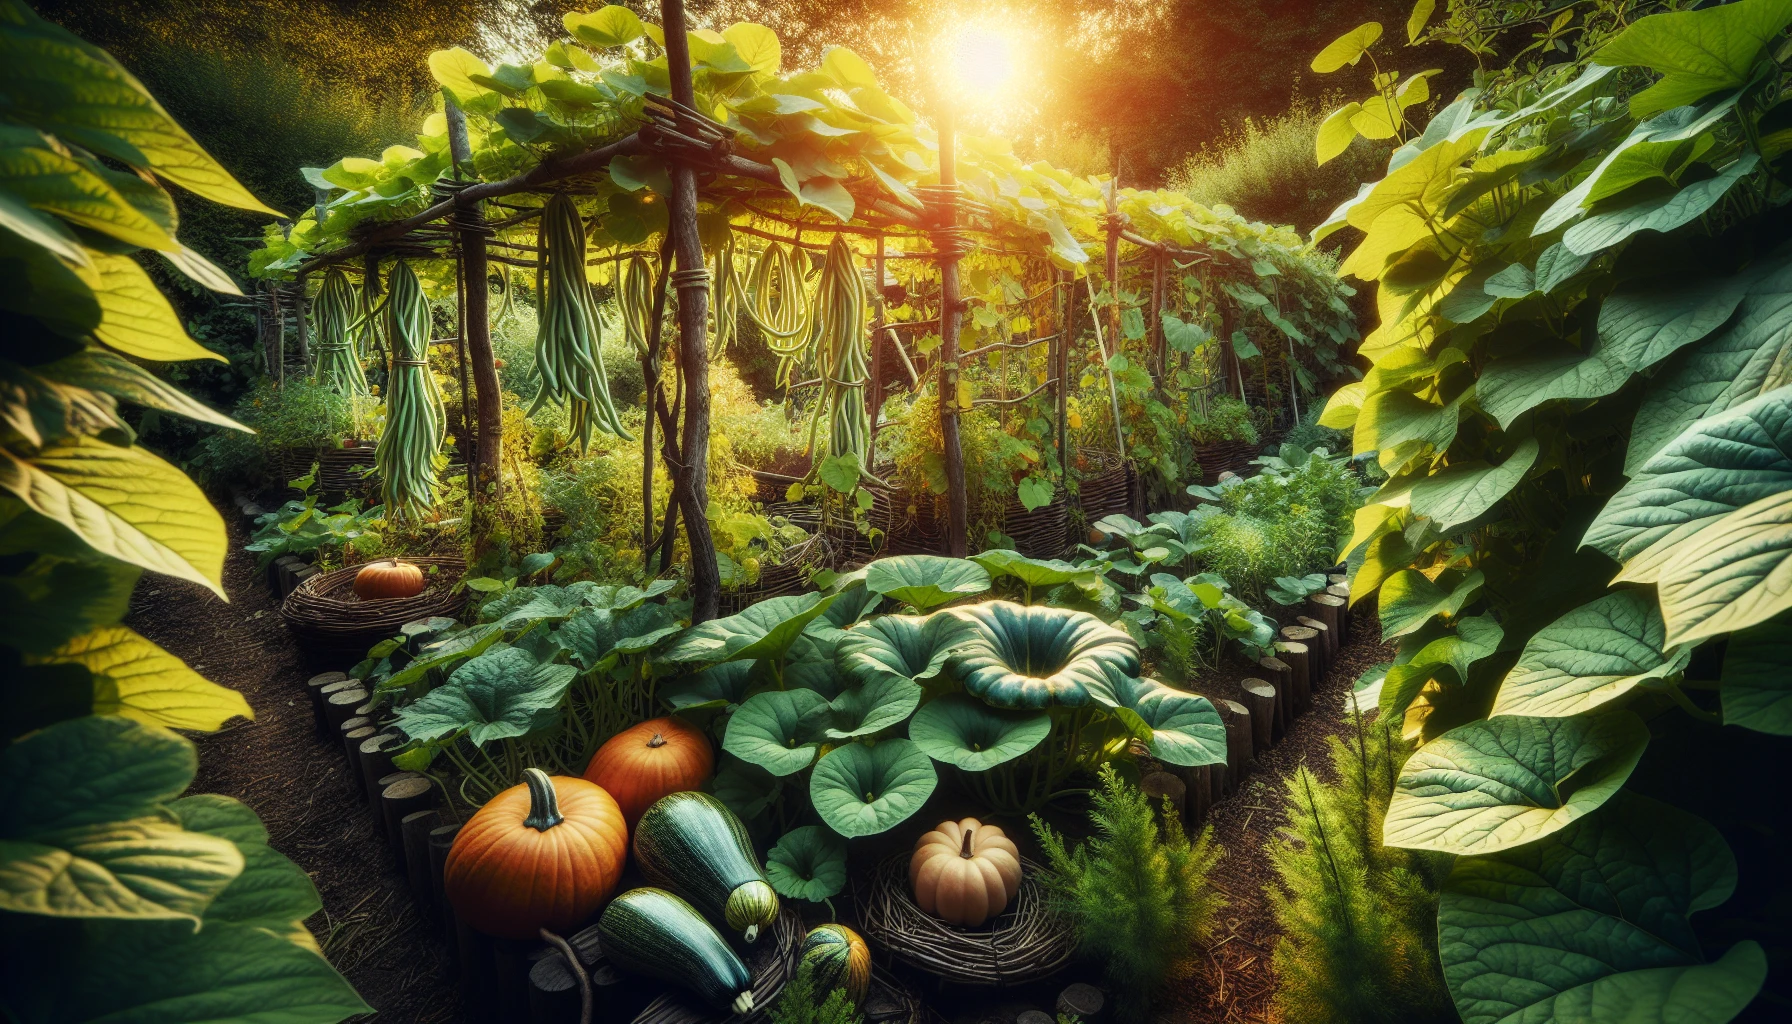 High-yield vegetables in a thriving survival garden